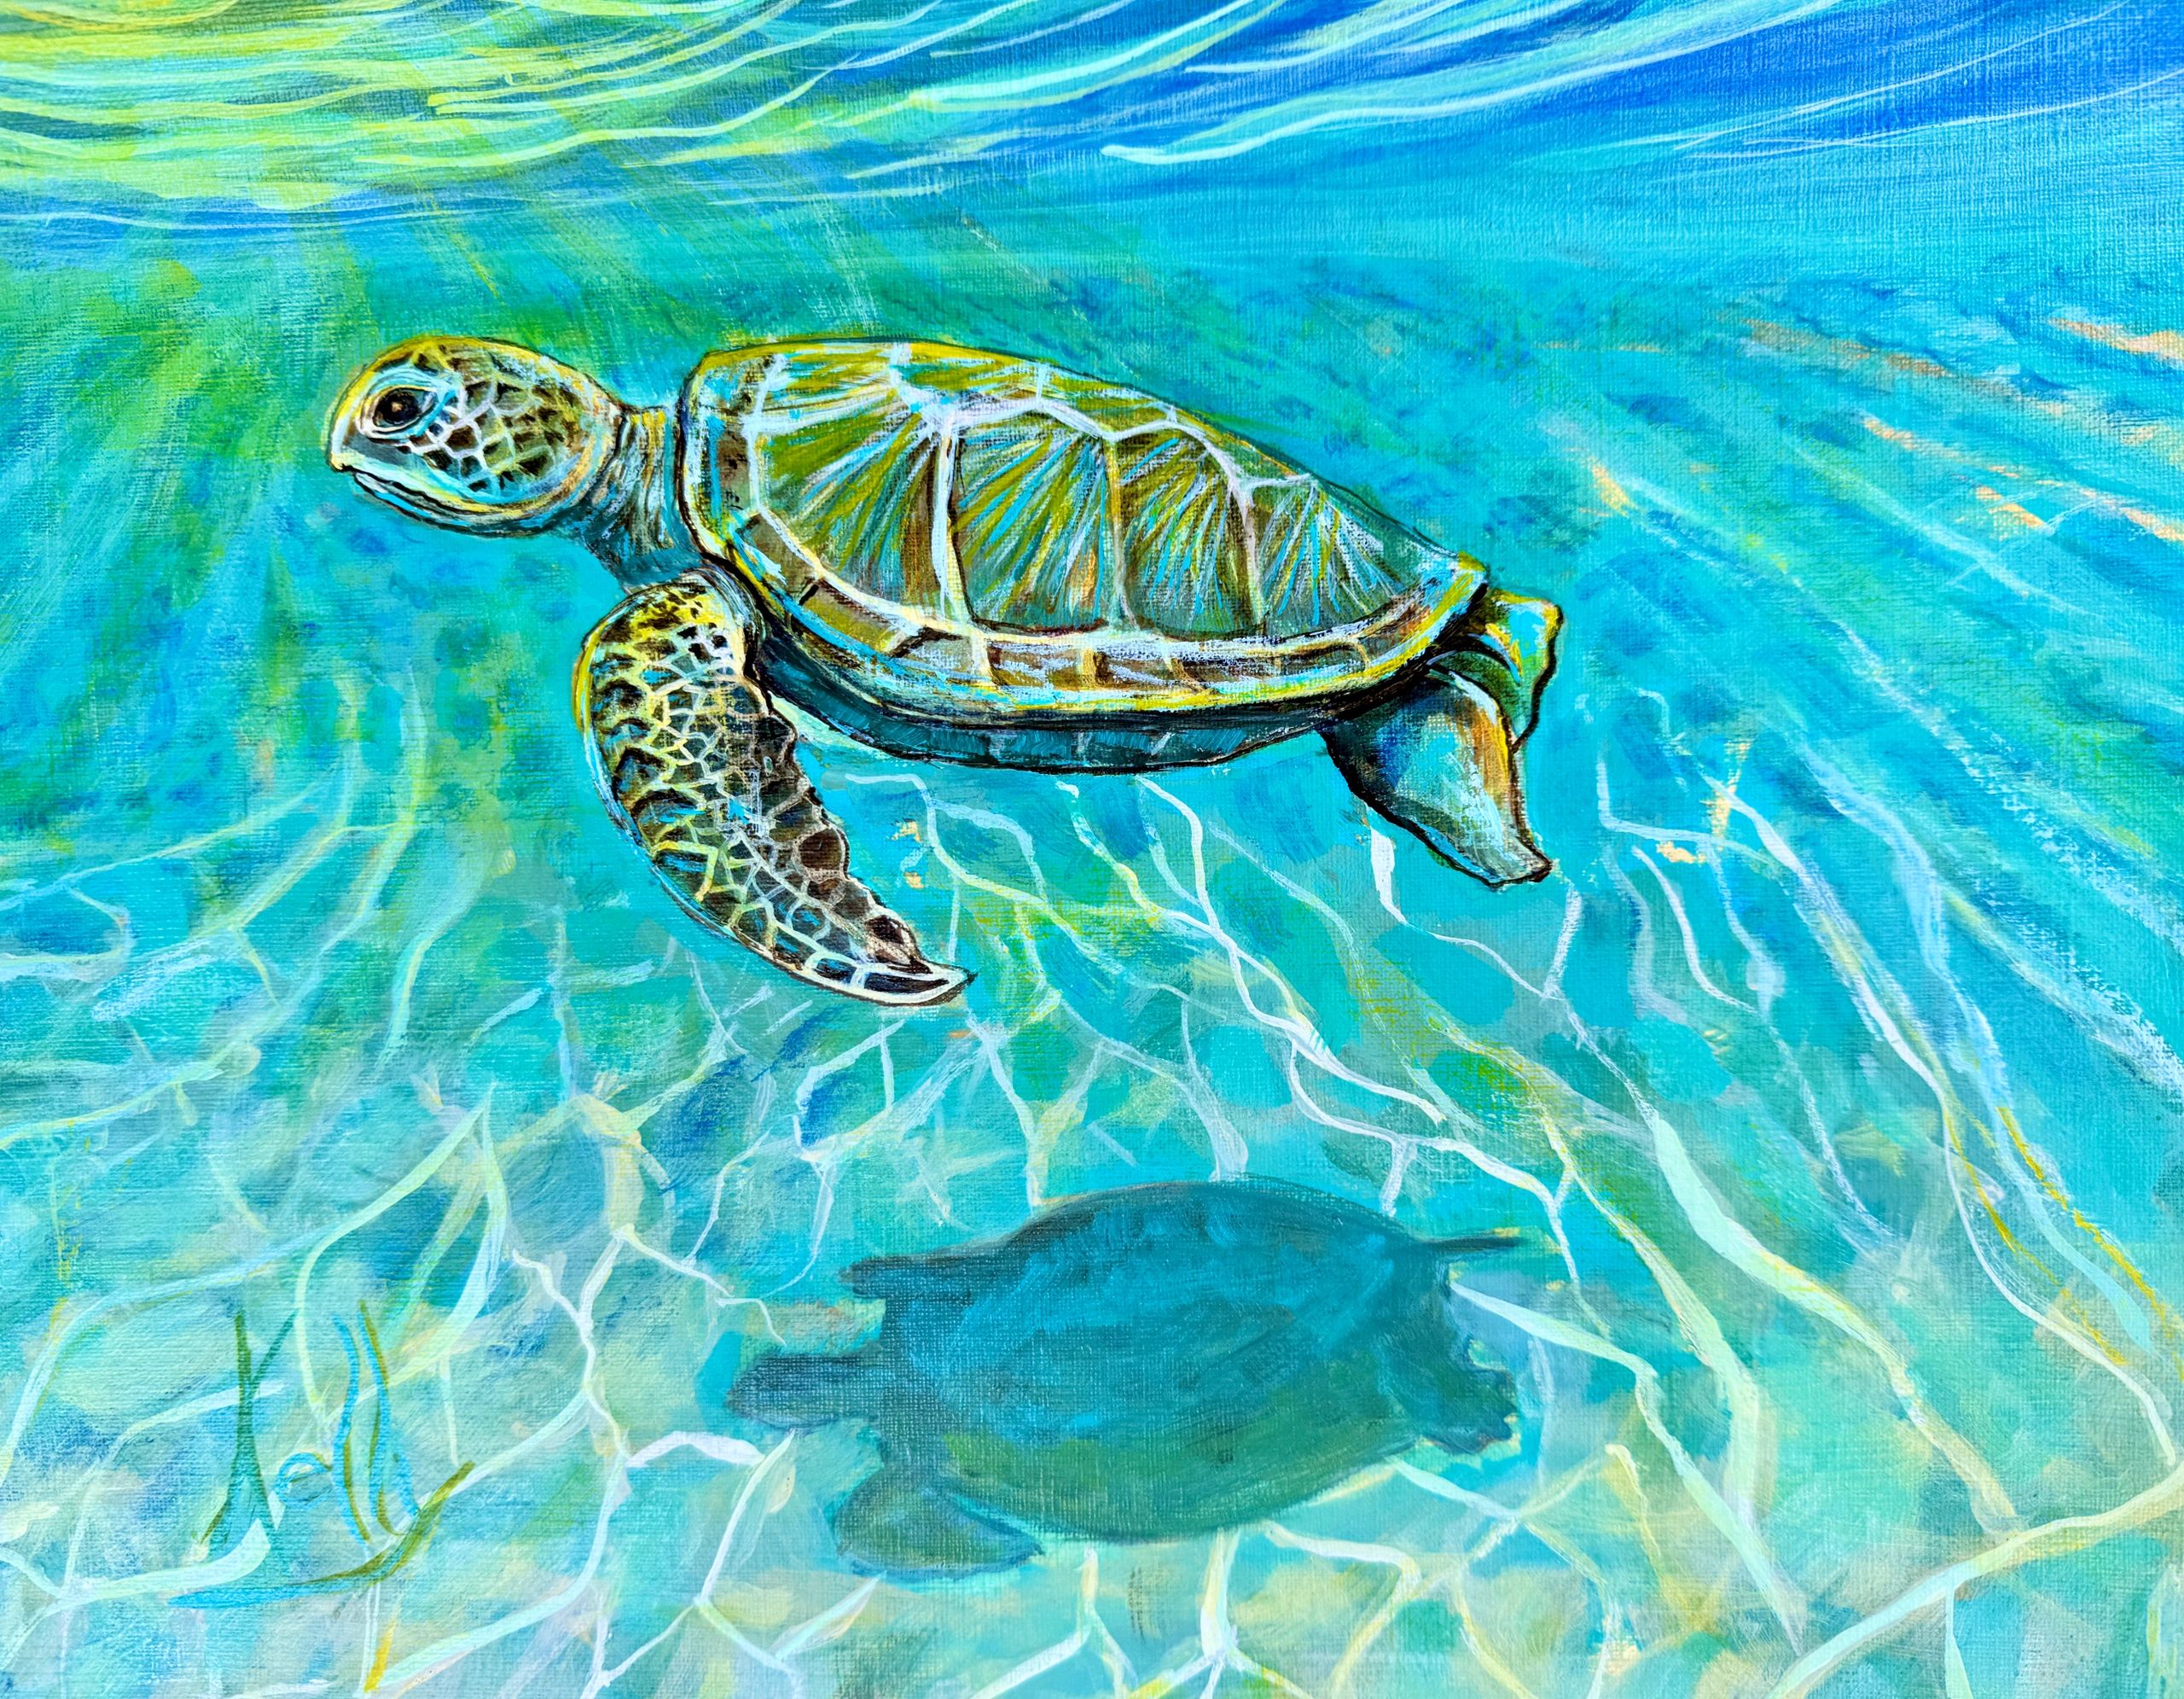 “Me and my Shadow”
Green Turtle from a photo taken at Farmers Cay last year.